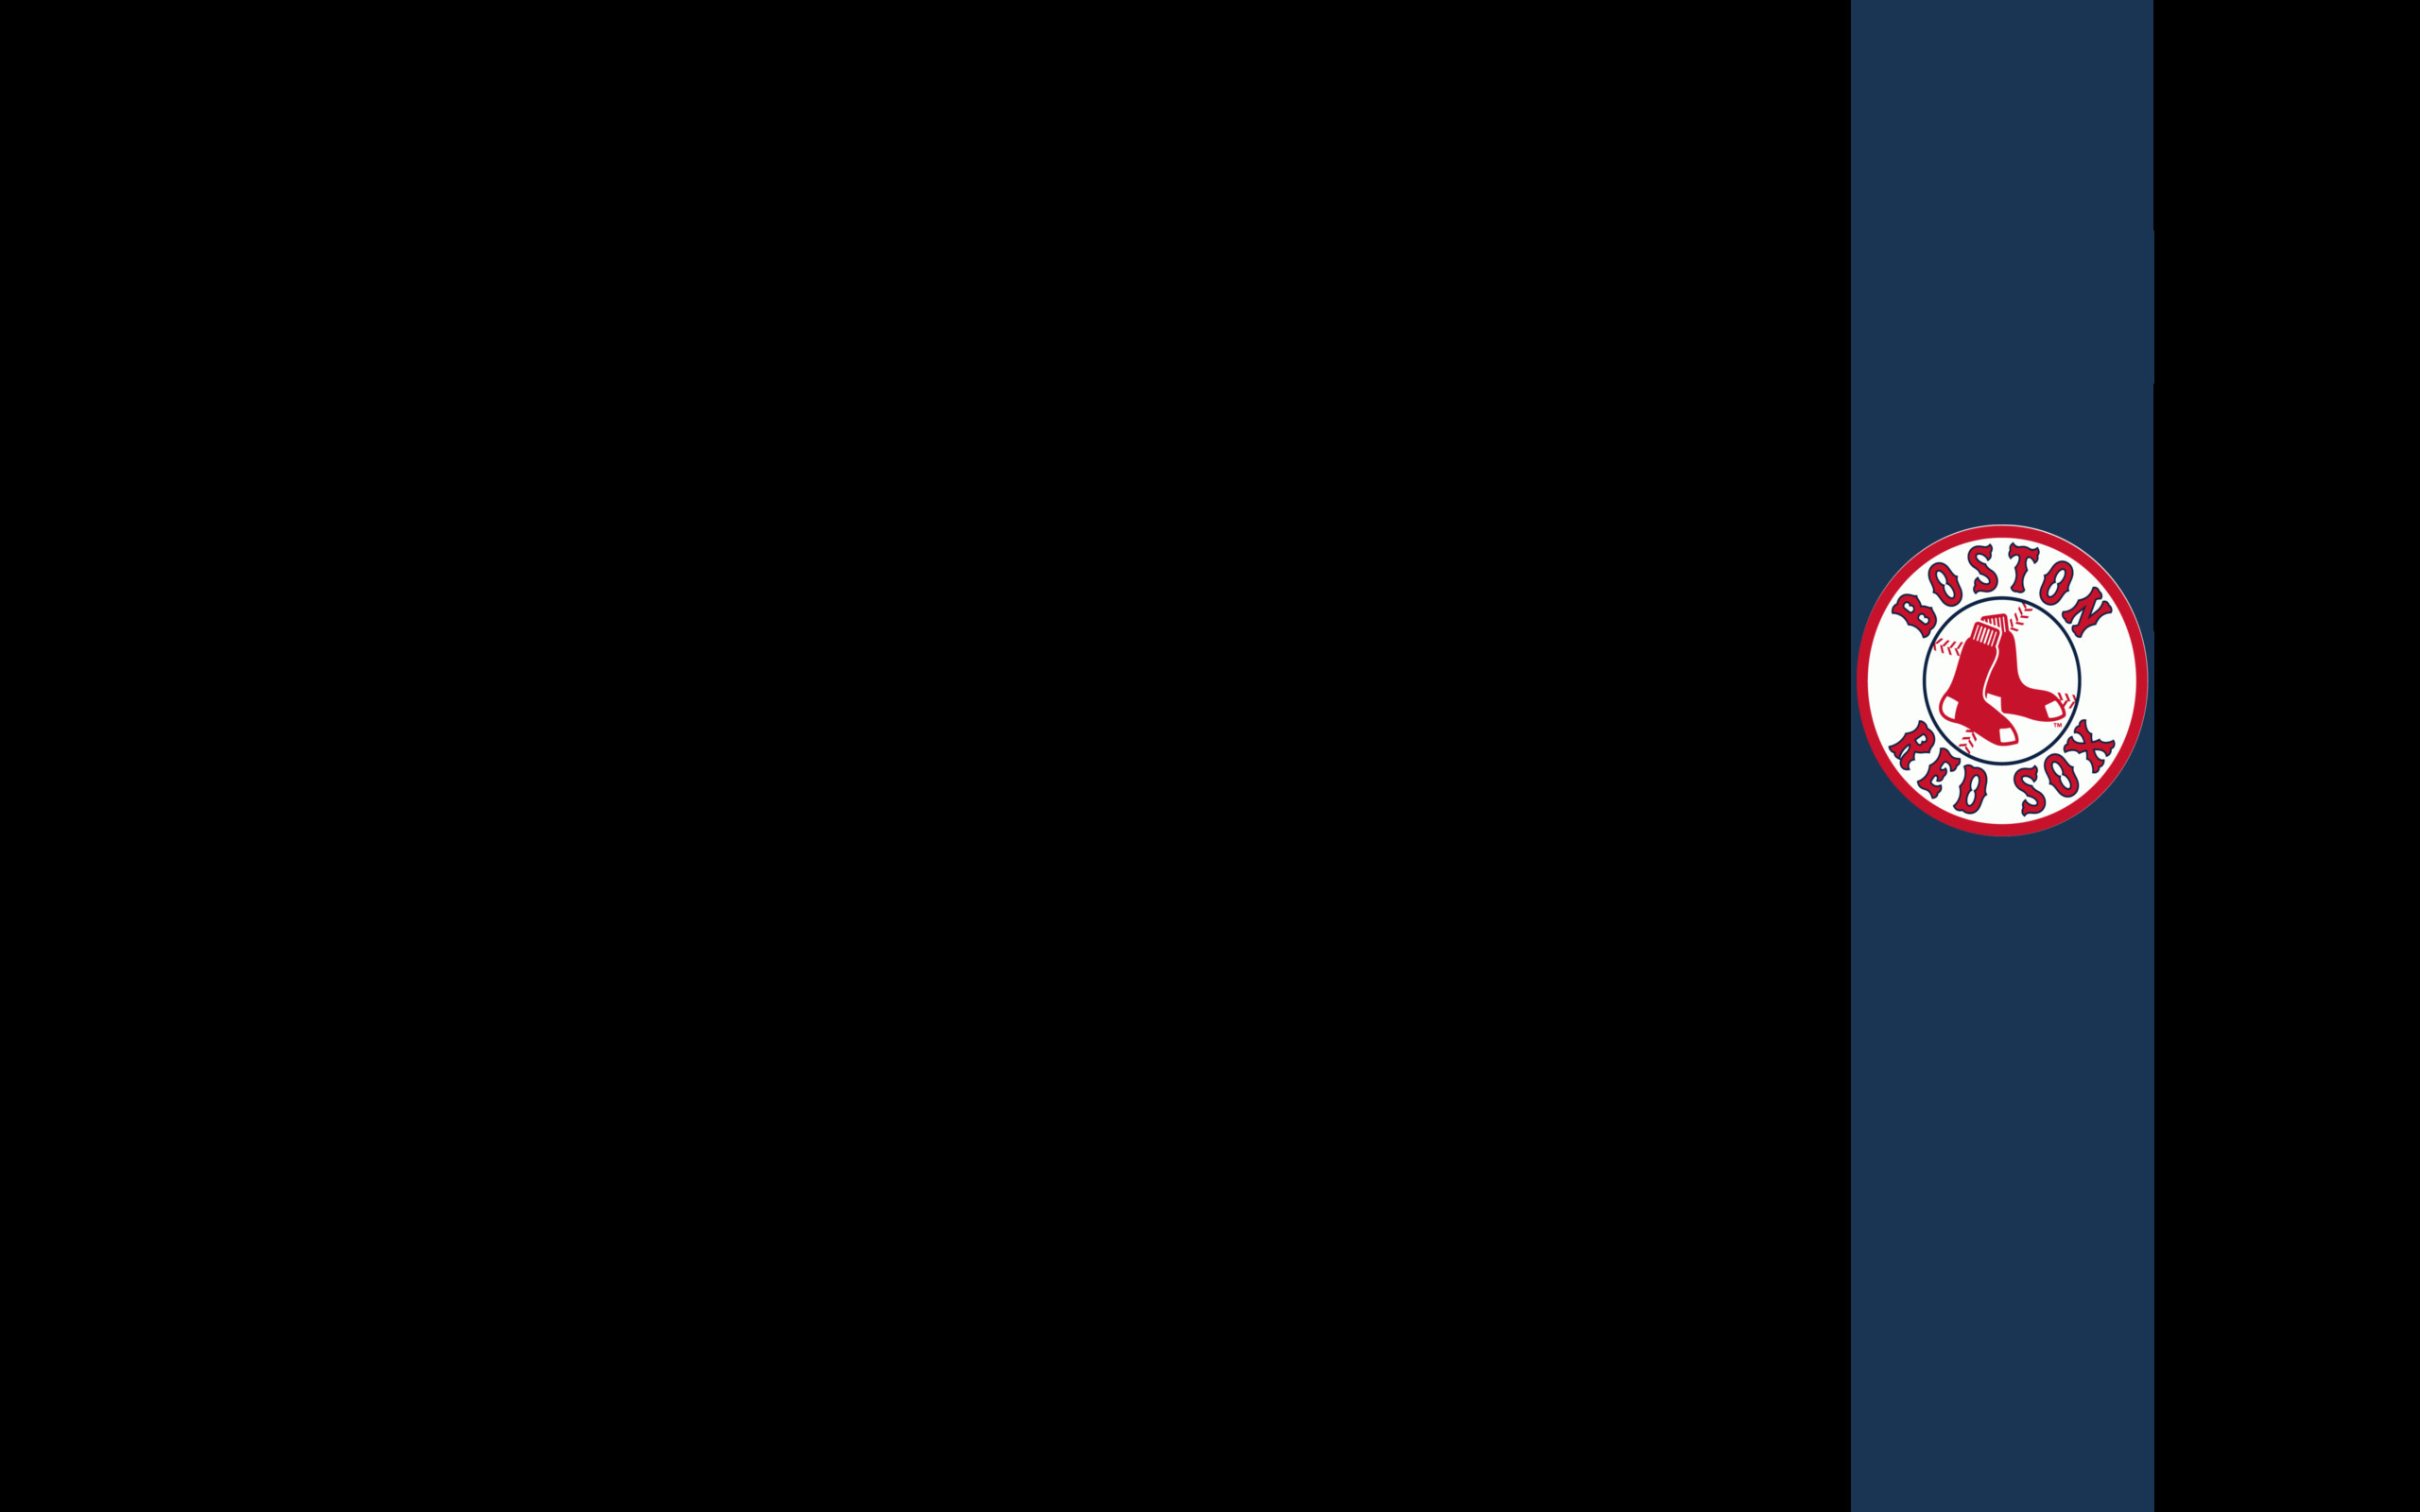 2560x1600 Boston Red Sox Wallpaper in High Resolution at Sports Wallpaper 